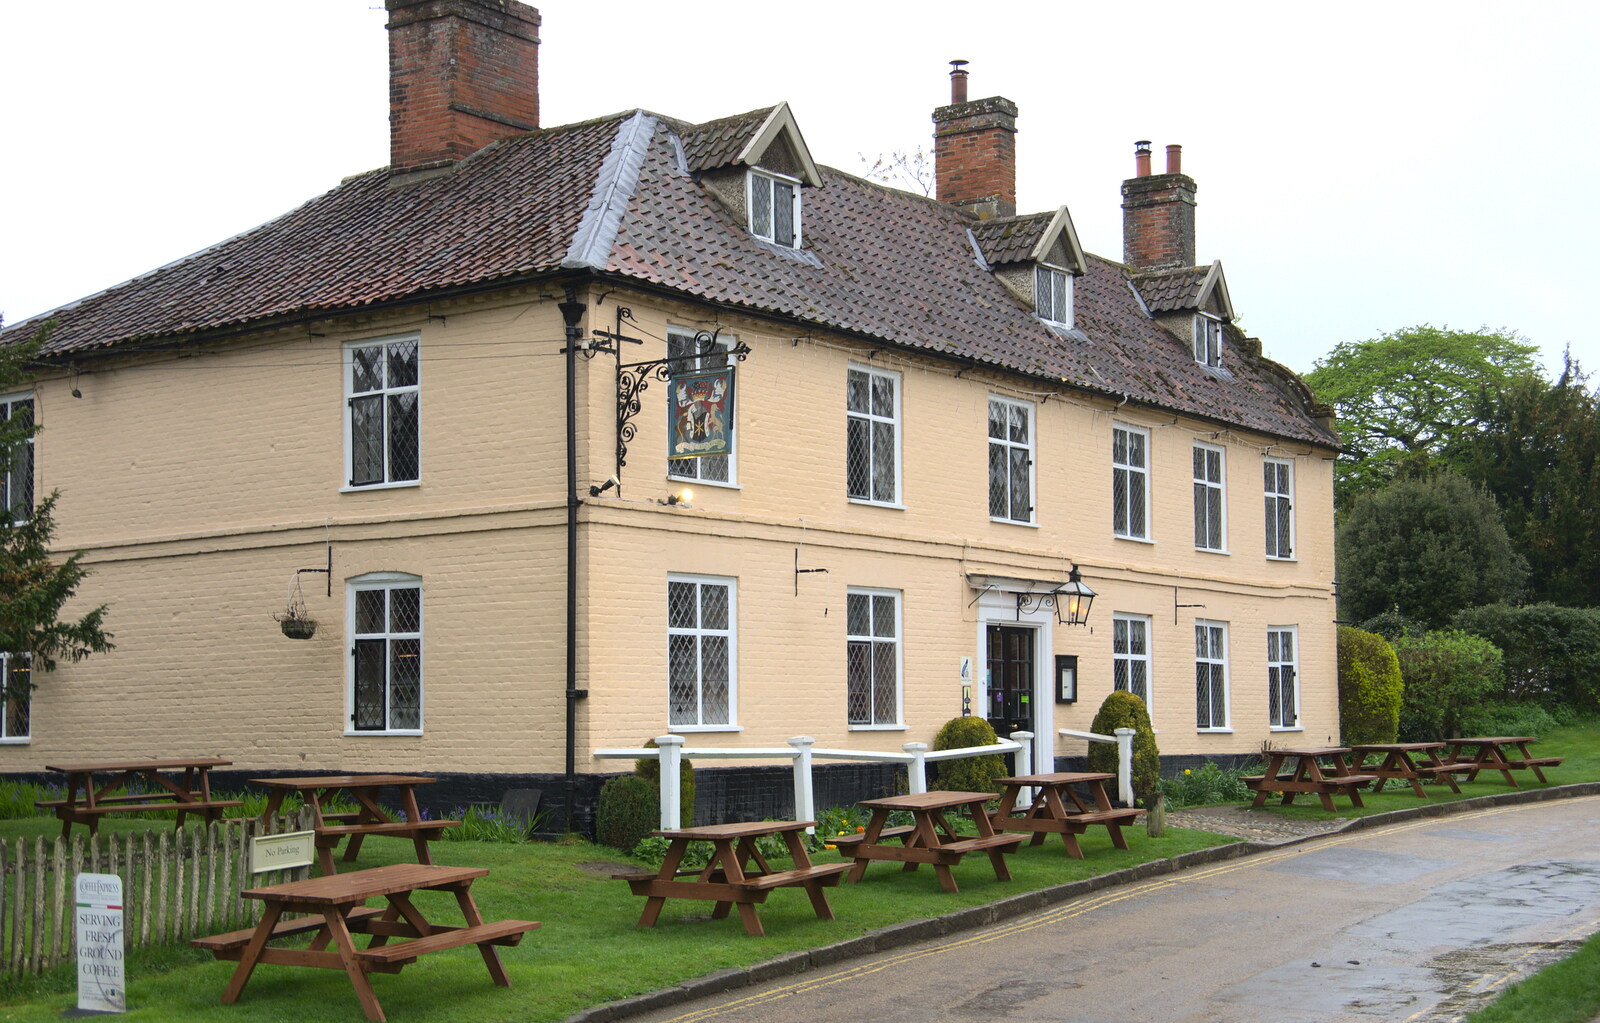 The Buckinghamshire Arms, next to the hall from A Trip to Blickling Hall, Aylsham, Norfolk - 29th April 2018